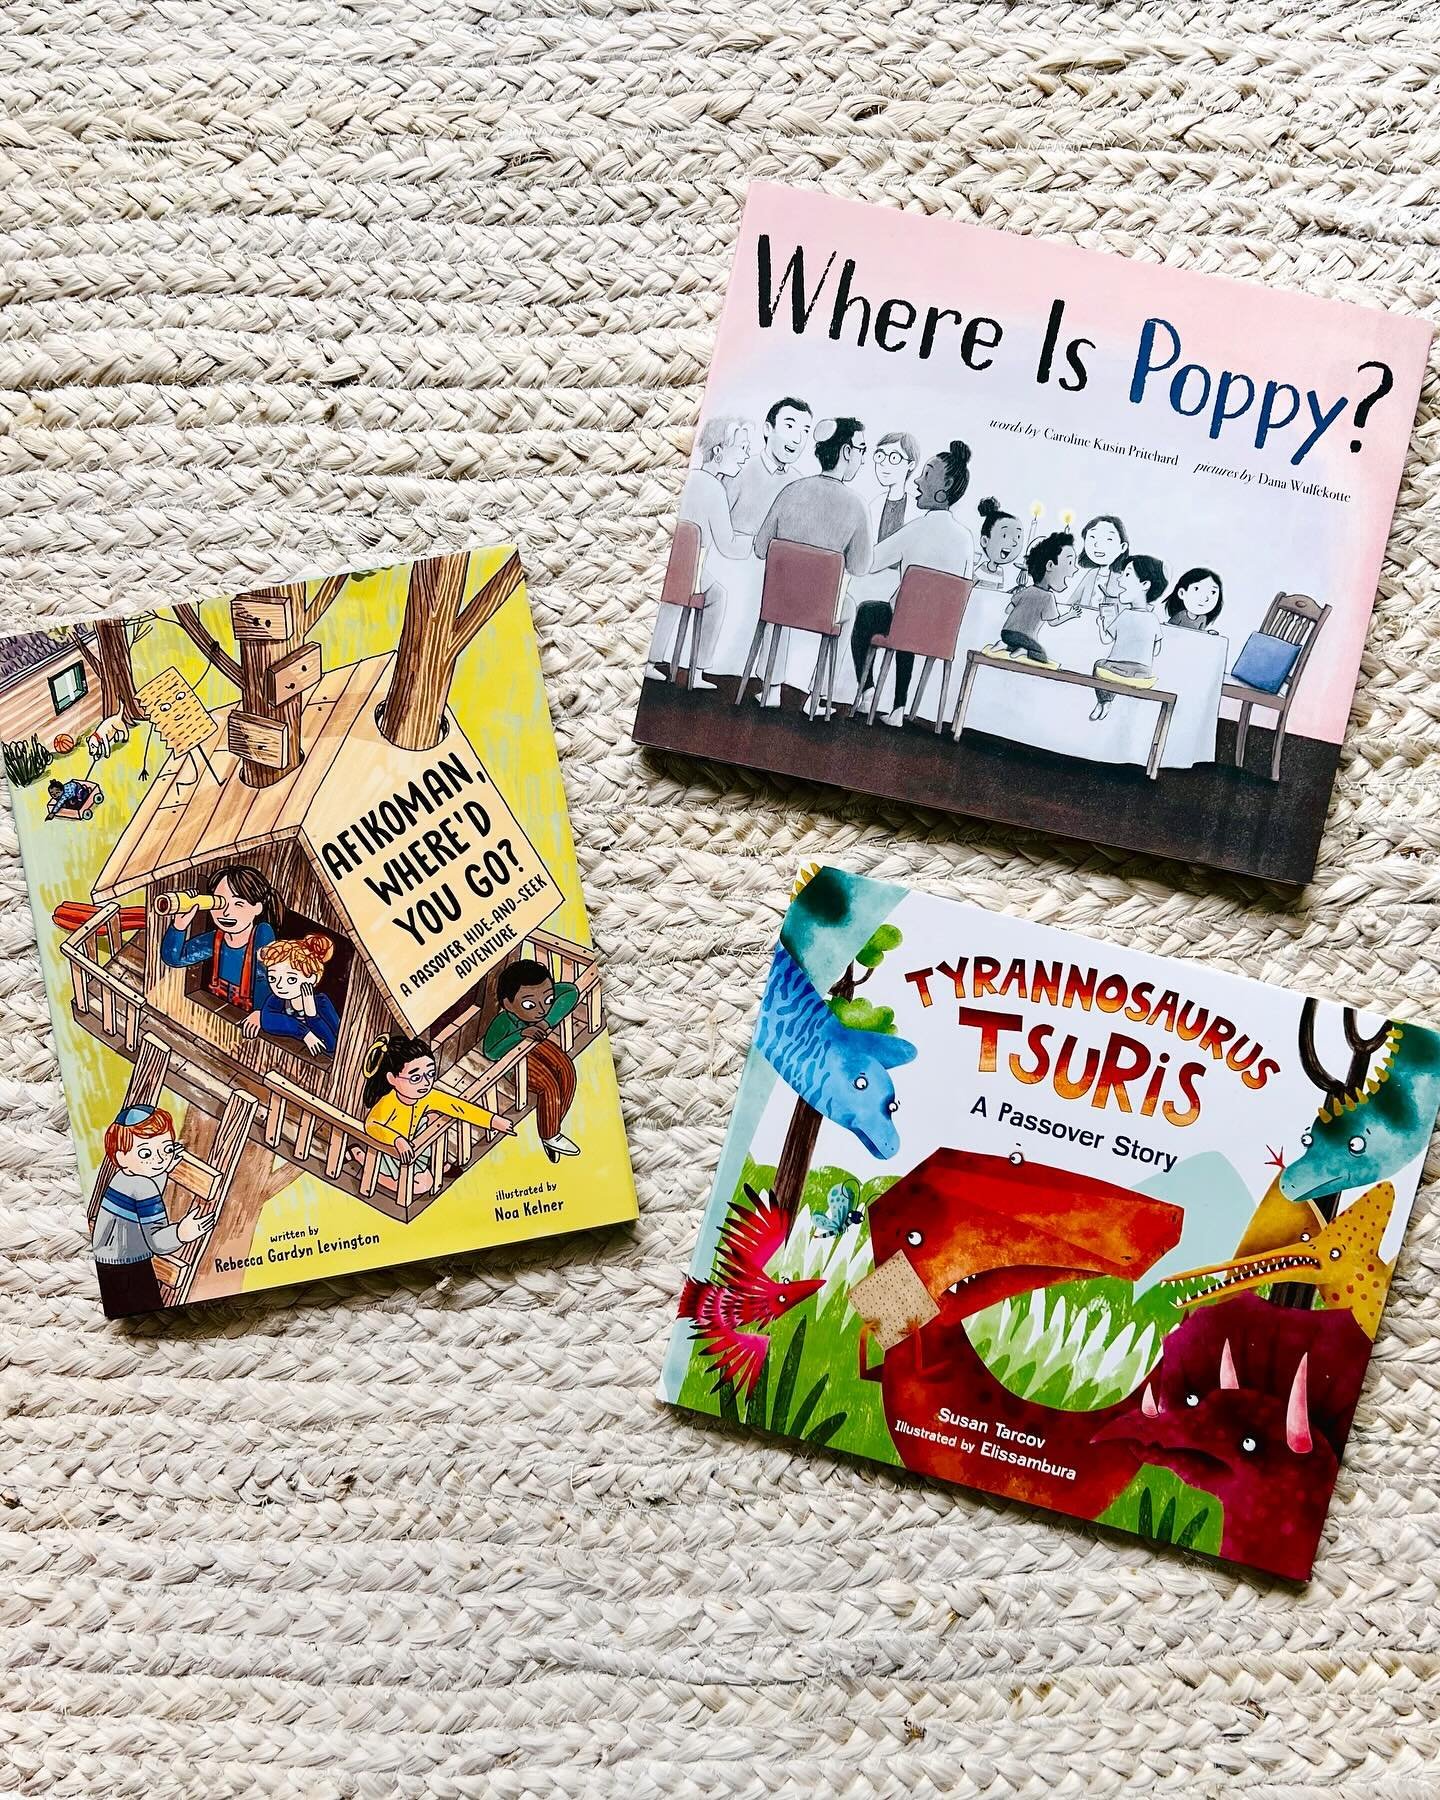 Happy Passover to all who are celebrating! Here are three recent picture book releases that depict Passover traditions within unique and engaging stories. 🙌 

❤️Where Is Poppy? | @simonkids | @carolinepritchardwrites + @danawulf 
In this tender stor